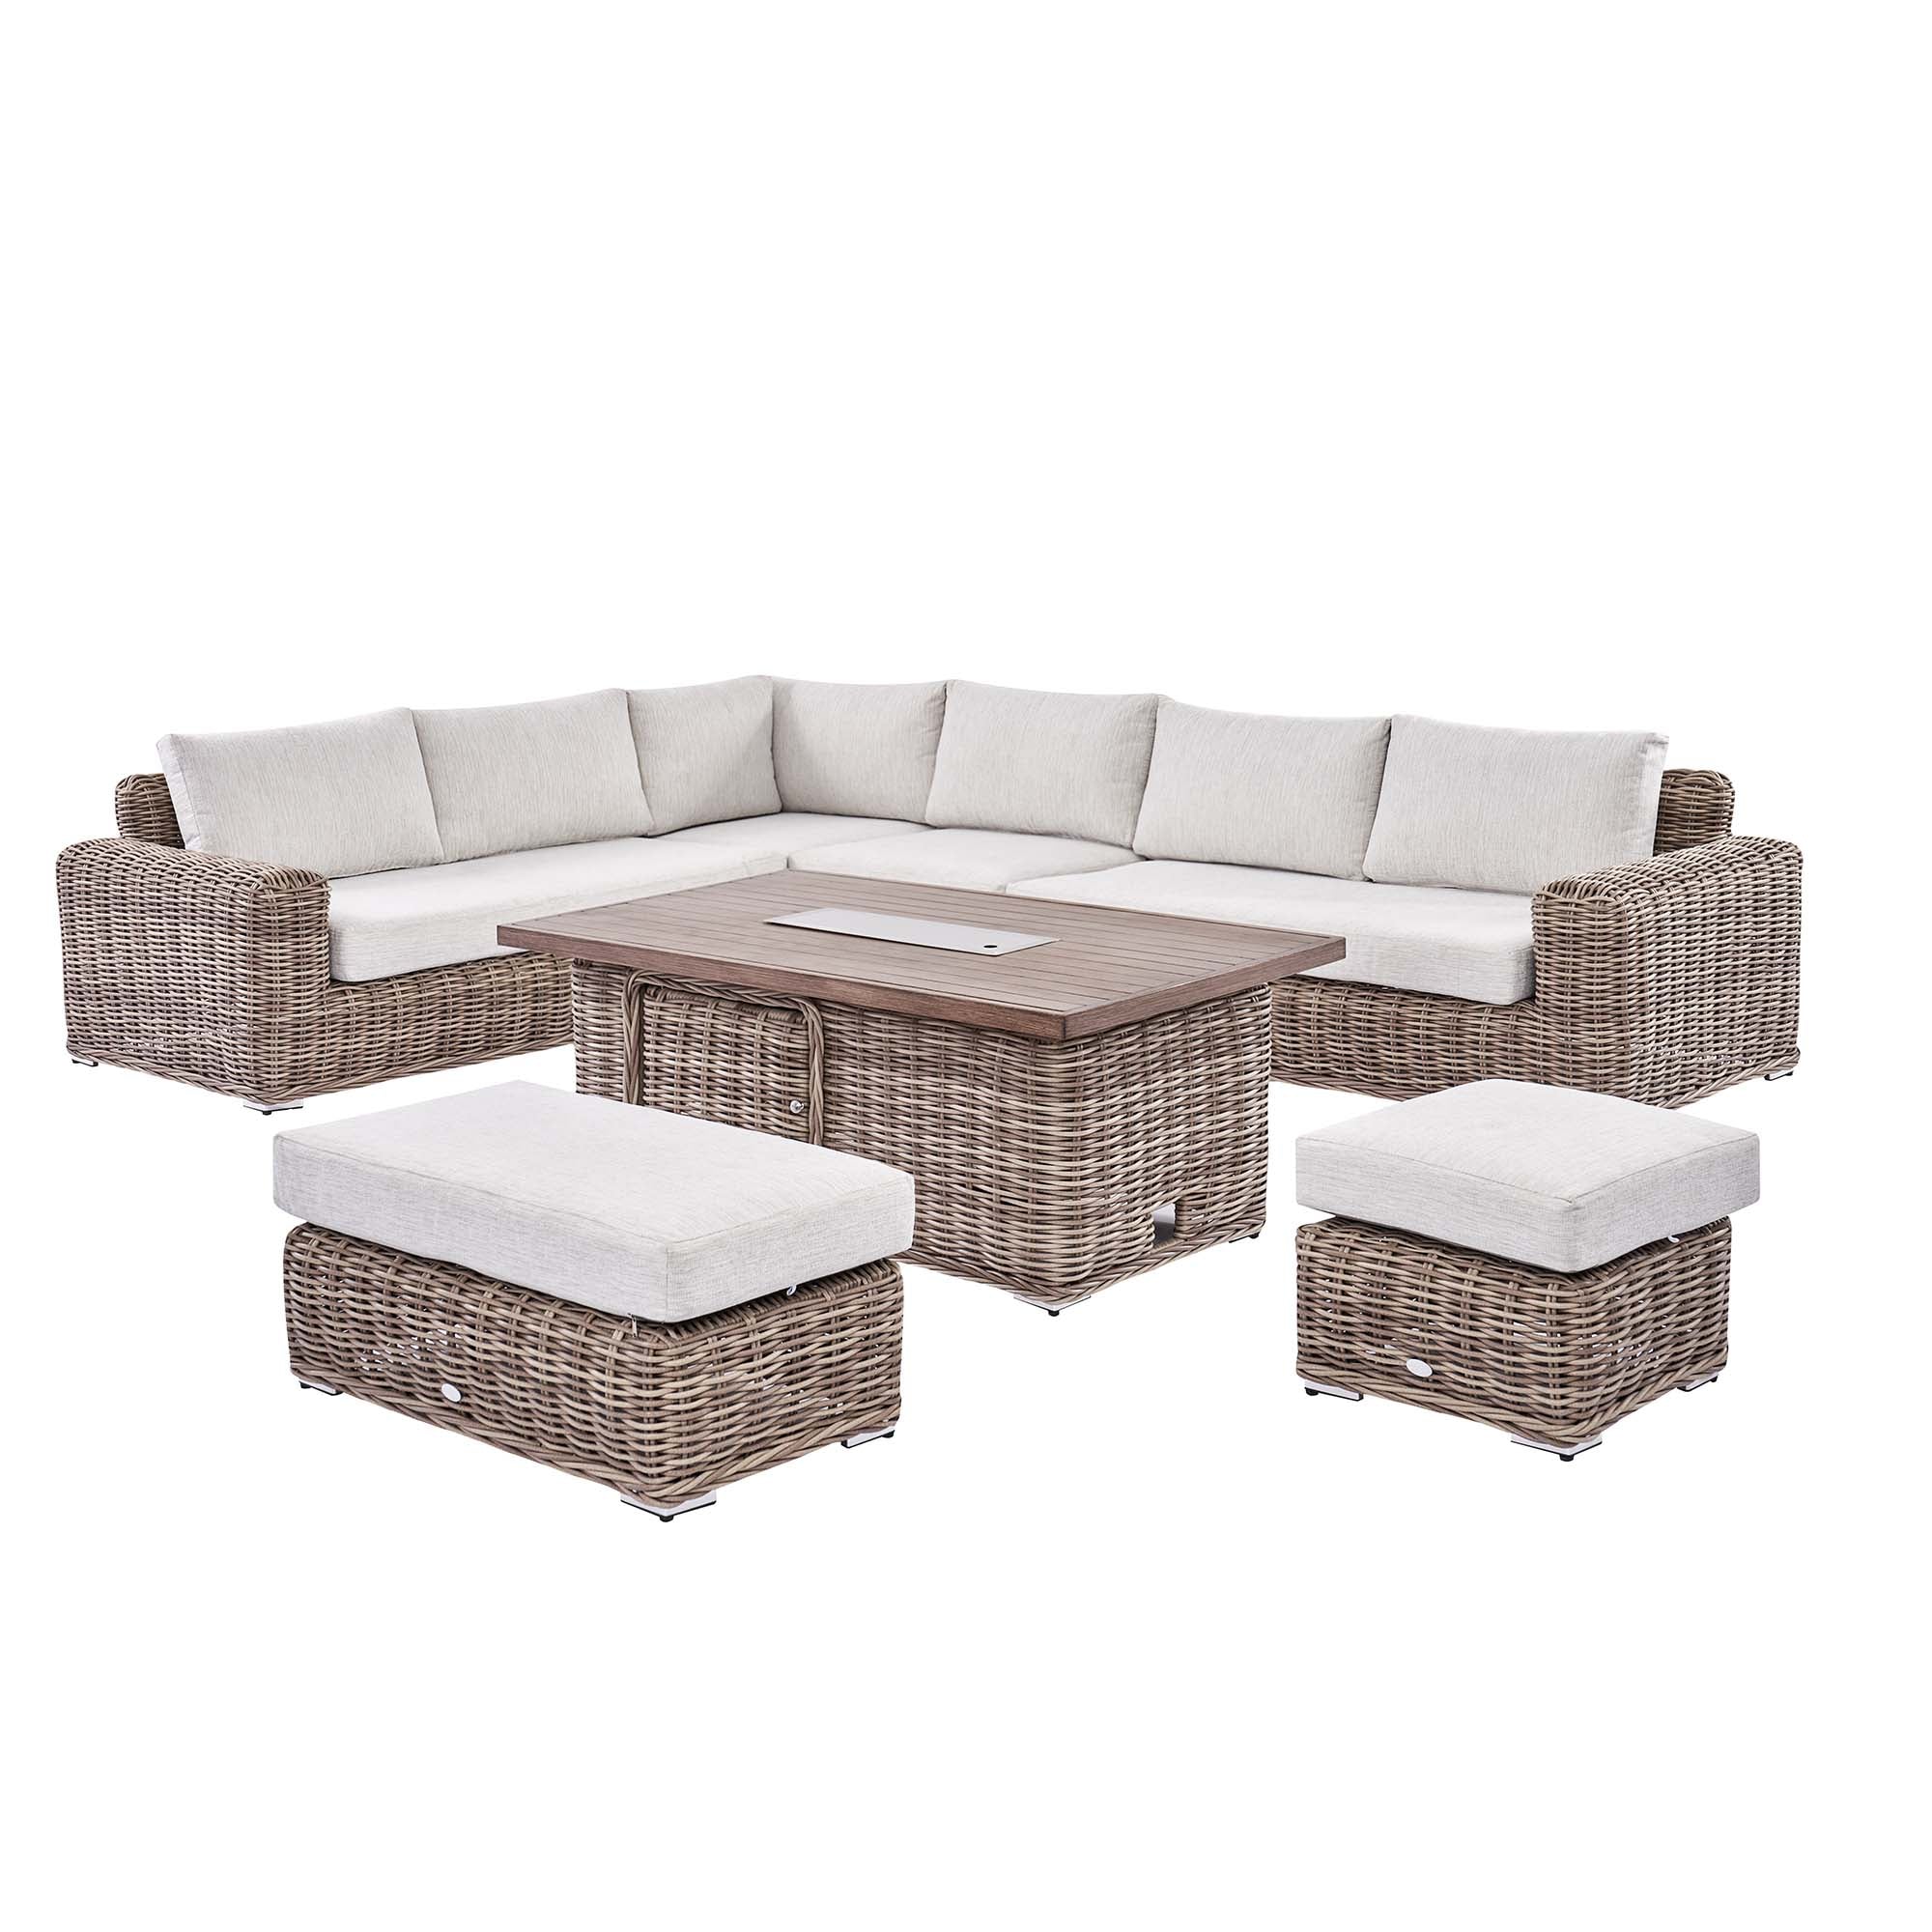 Bellagio Round Wicker Large Corner Casual Dining Set with Rising Firepit Table, Natural